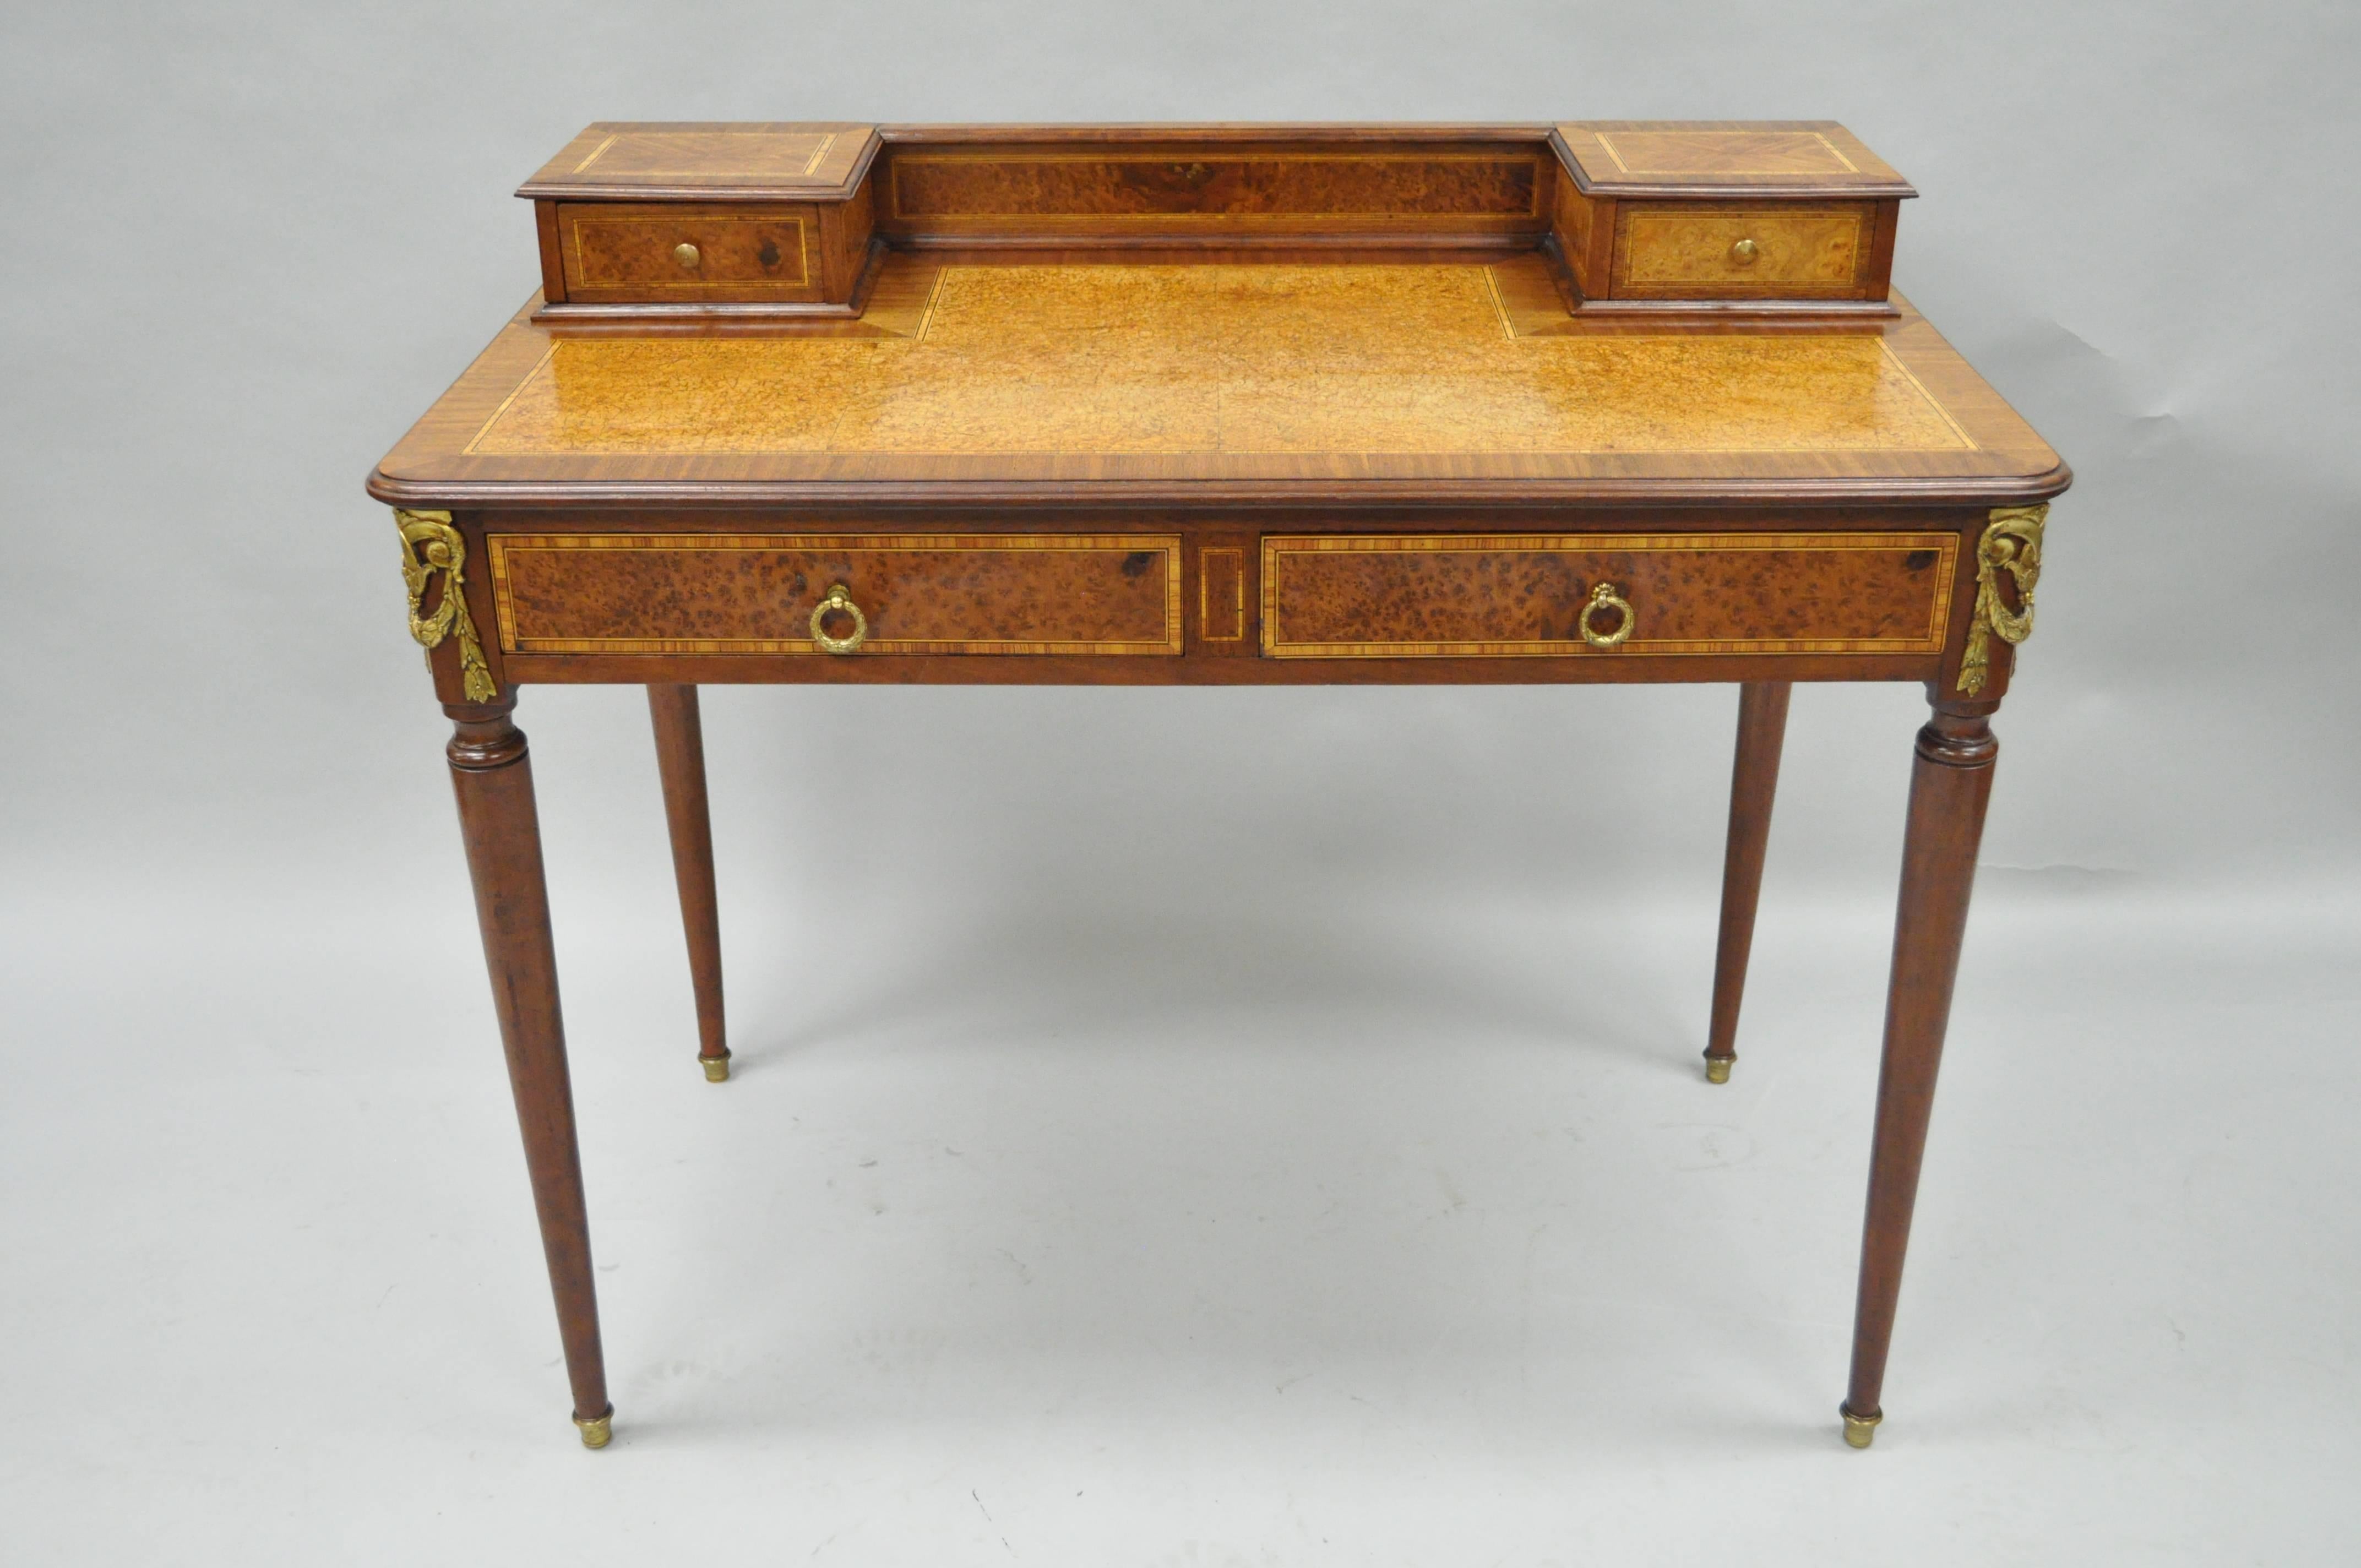 Early 20th century petite French Louis XVI style ladies writing desk. Item features a mahogany wood frame with bird's-eye maple and satinwood banded inlays, cast bronze drape form ormolu and hardware, and elegant French form. Table further features